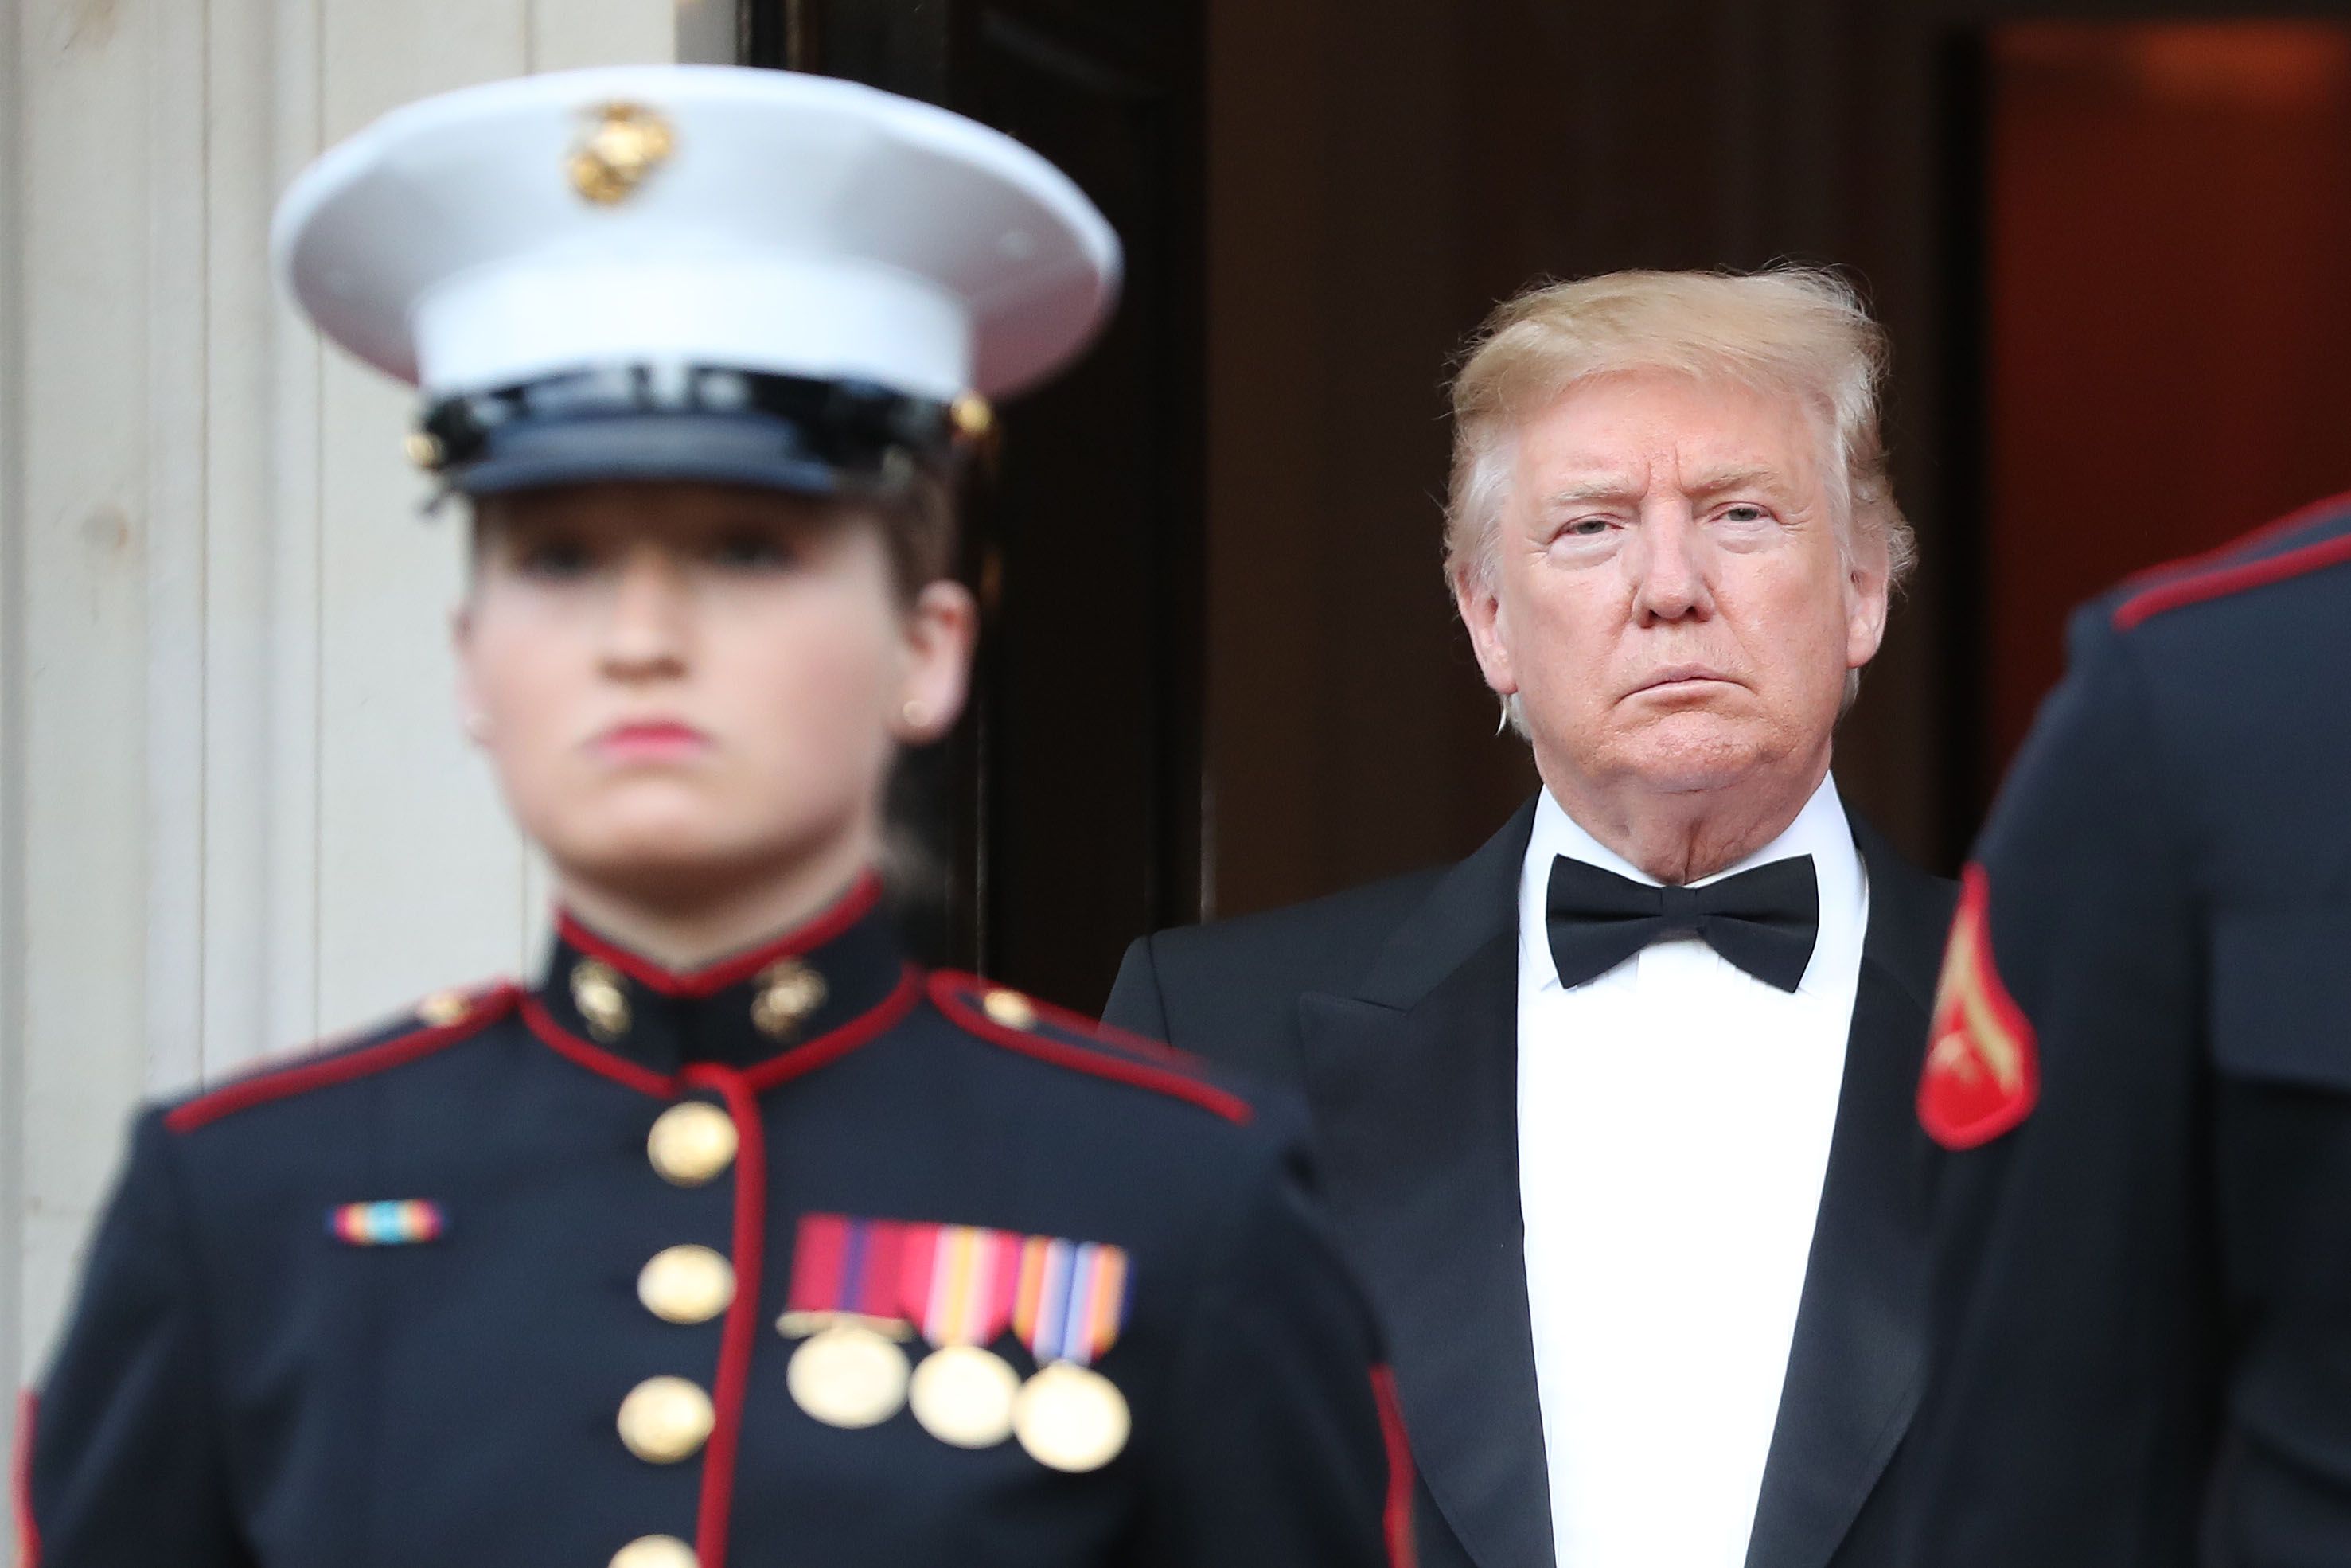 President Trump in Portsmouth to mark the 75th anniversary of the D-Day landings. (Photo by Chris Jackson - WPA Pool/Getty Images)